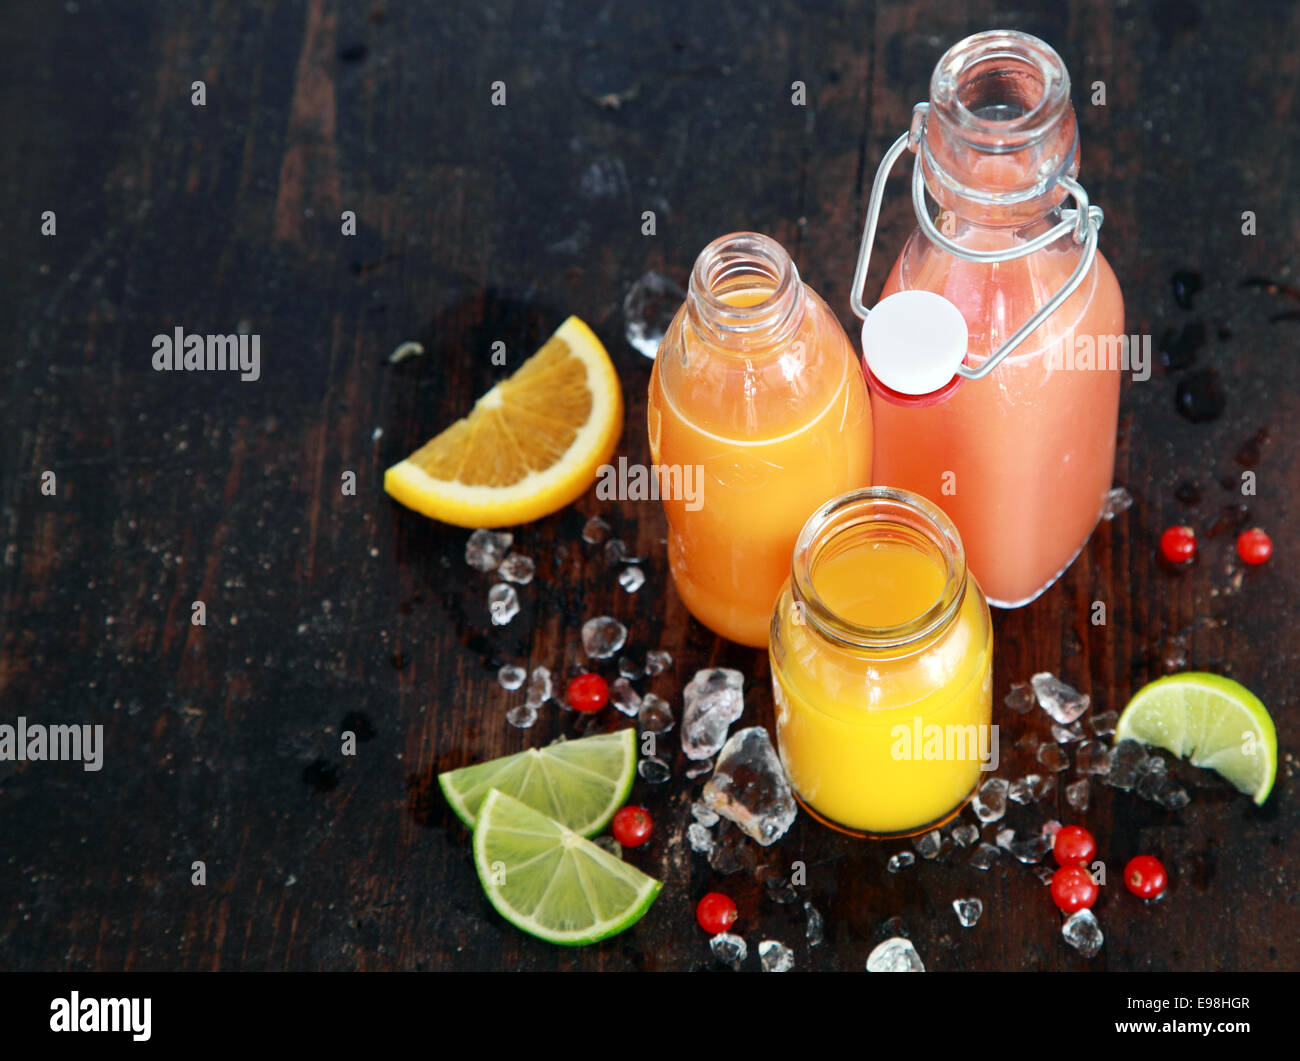 Preparing tasty healthy summer fruit juices in glass bottles with slices of fresh orange, lemon, lime and cranberries, viewed high angle on a dark rustic wooden surface with copyspace Stock Photo